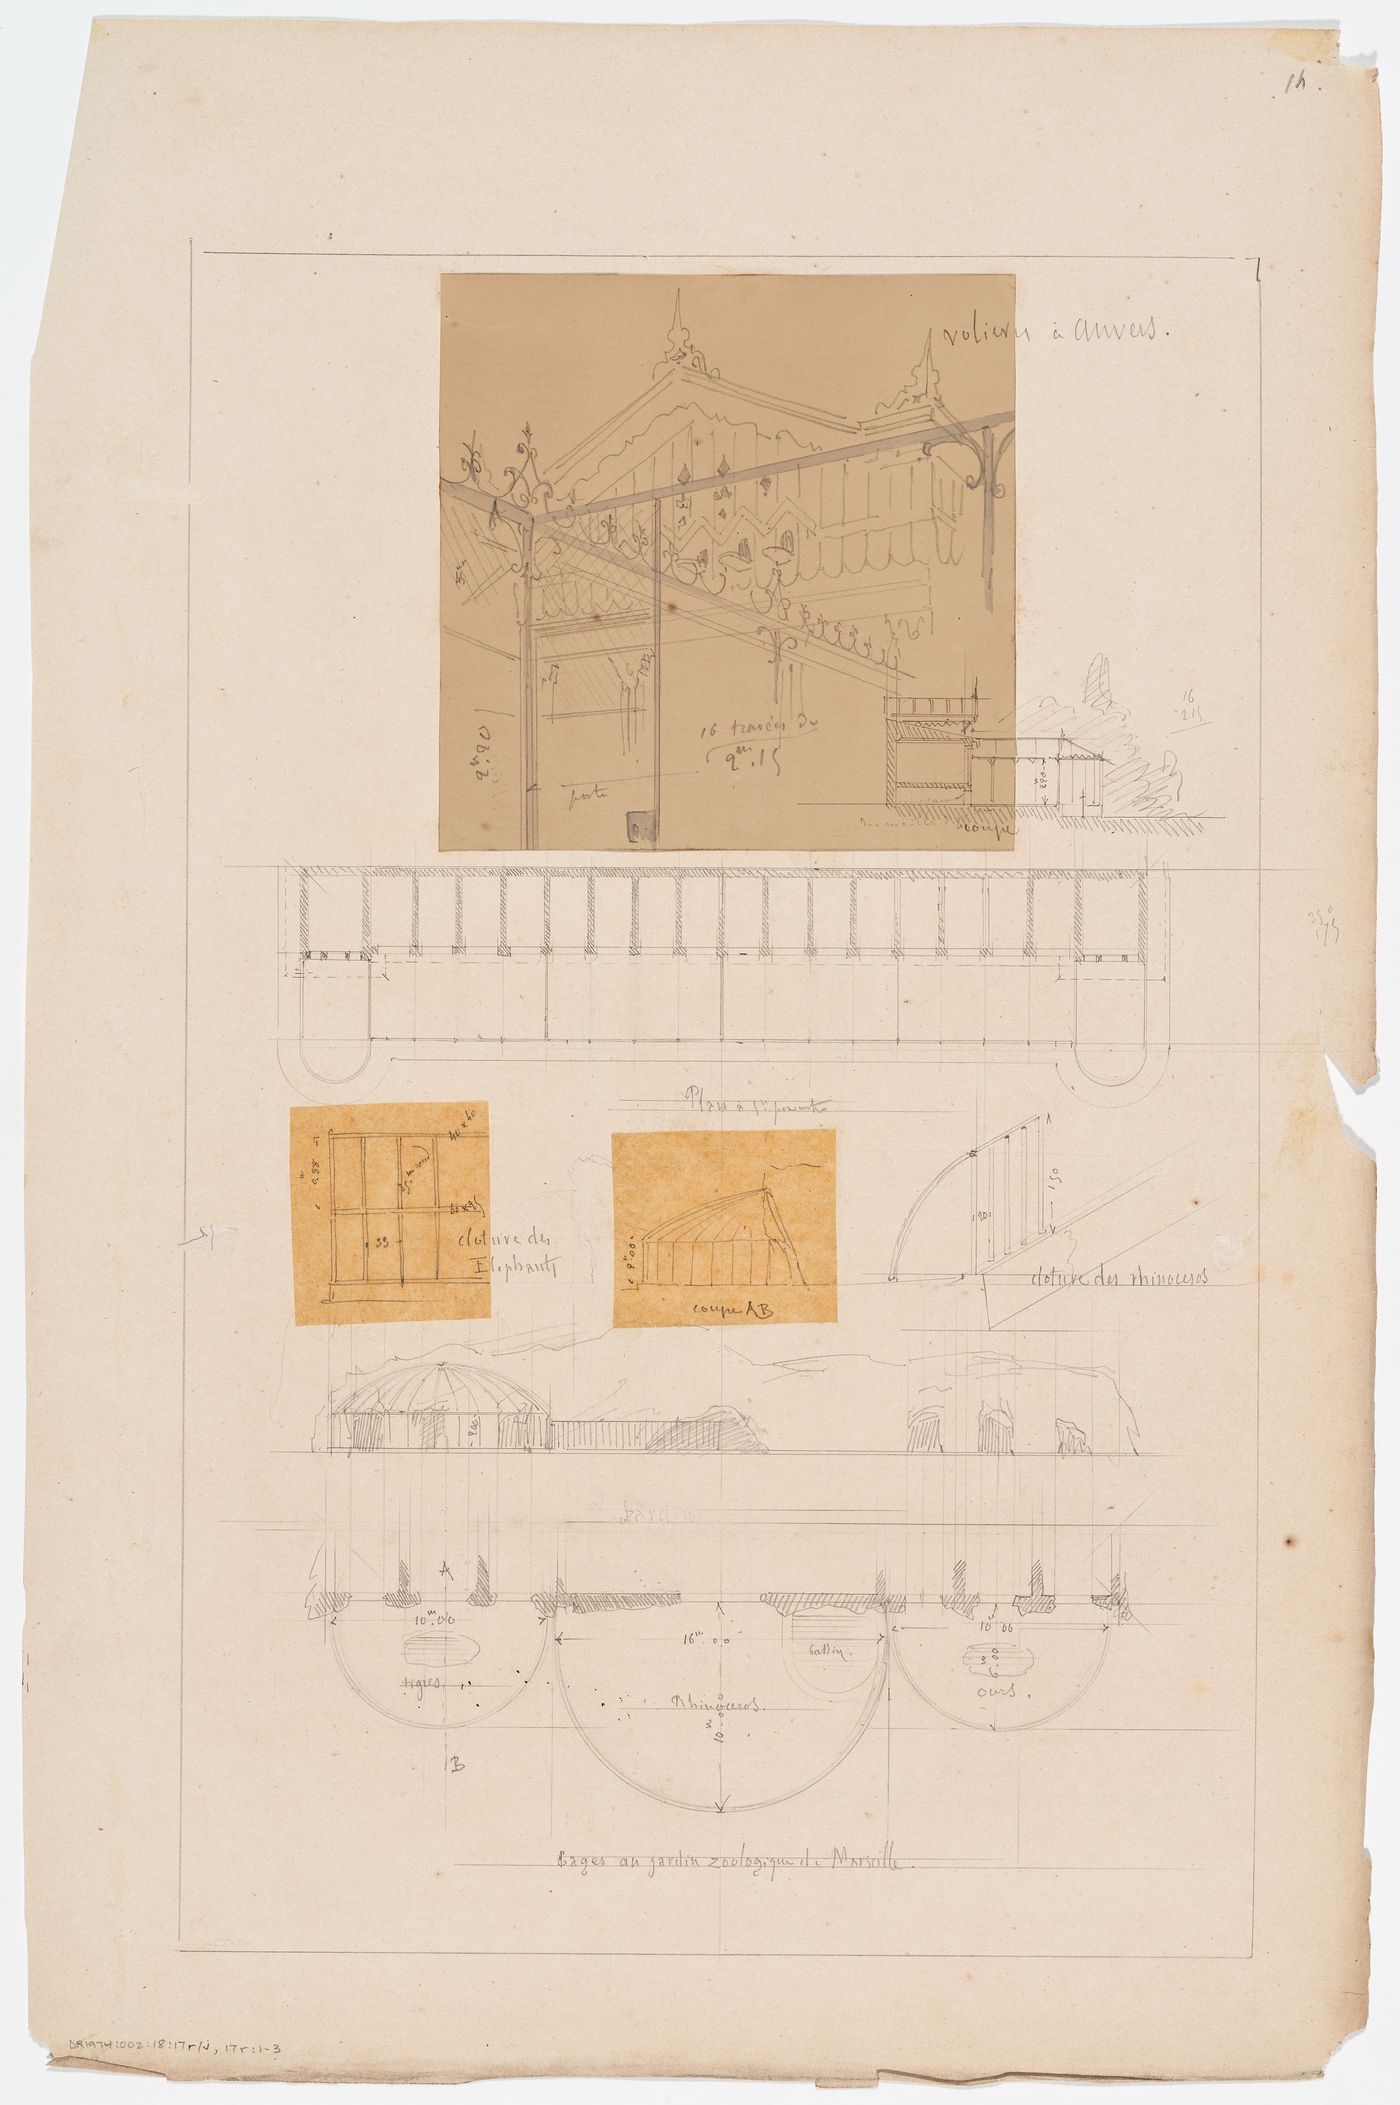 Zoological garden, Antwerp: Plan, section and sketch detail of an aviary; Zoological gardens, Marseille: Plan, elevation, section, and details of the tiger, rhinoceros, and bear cages